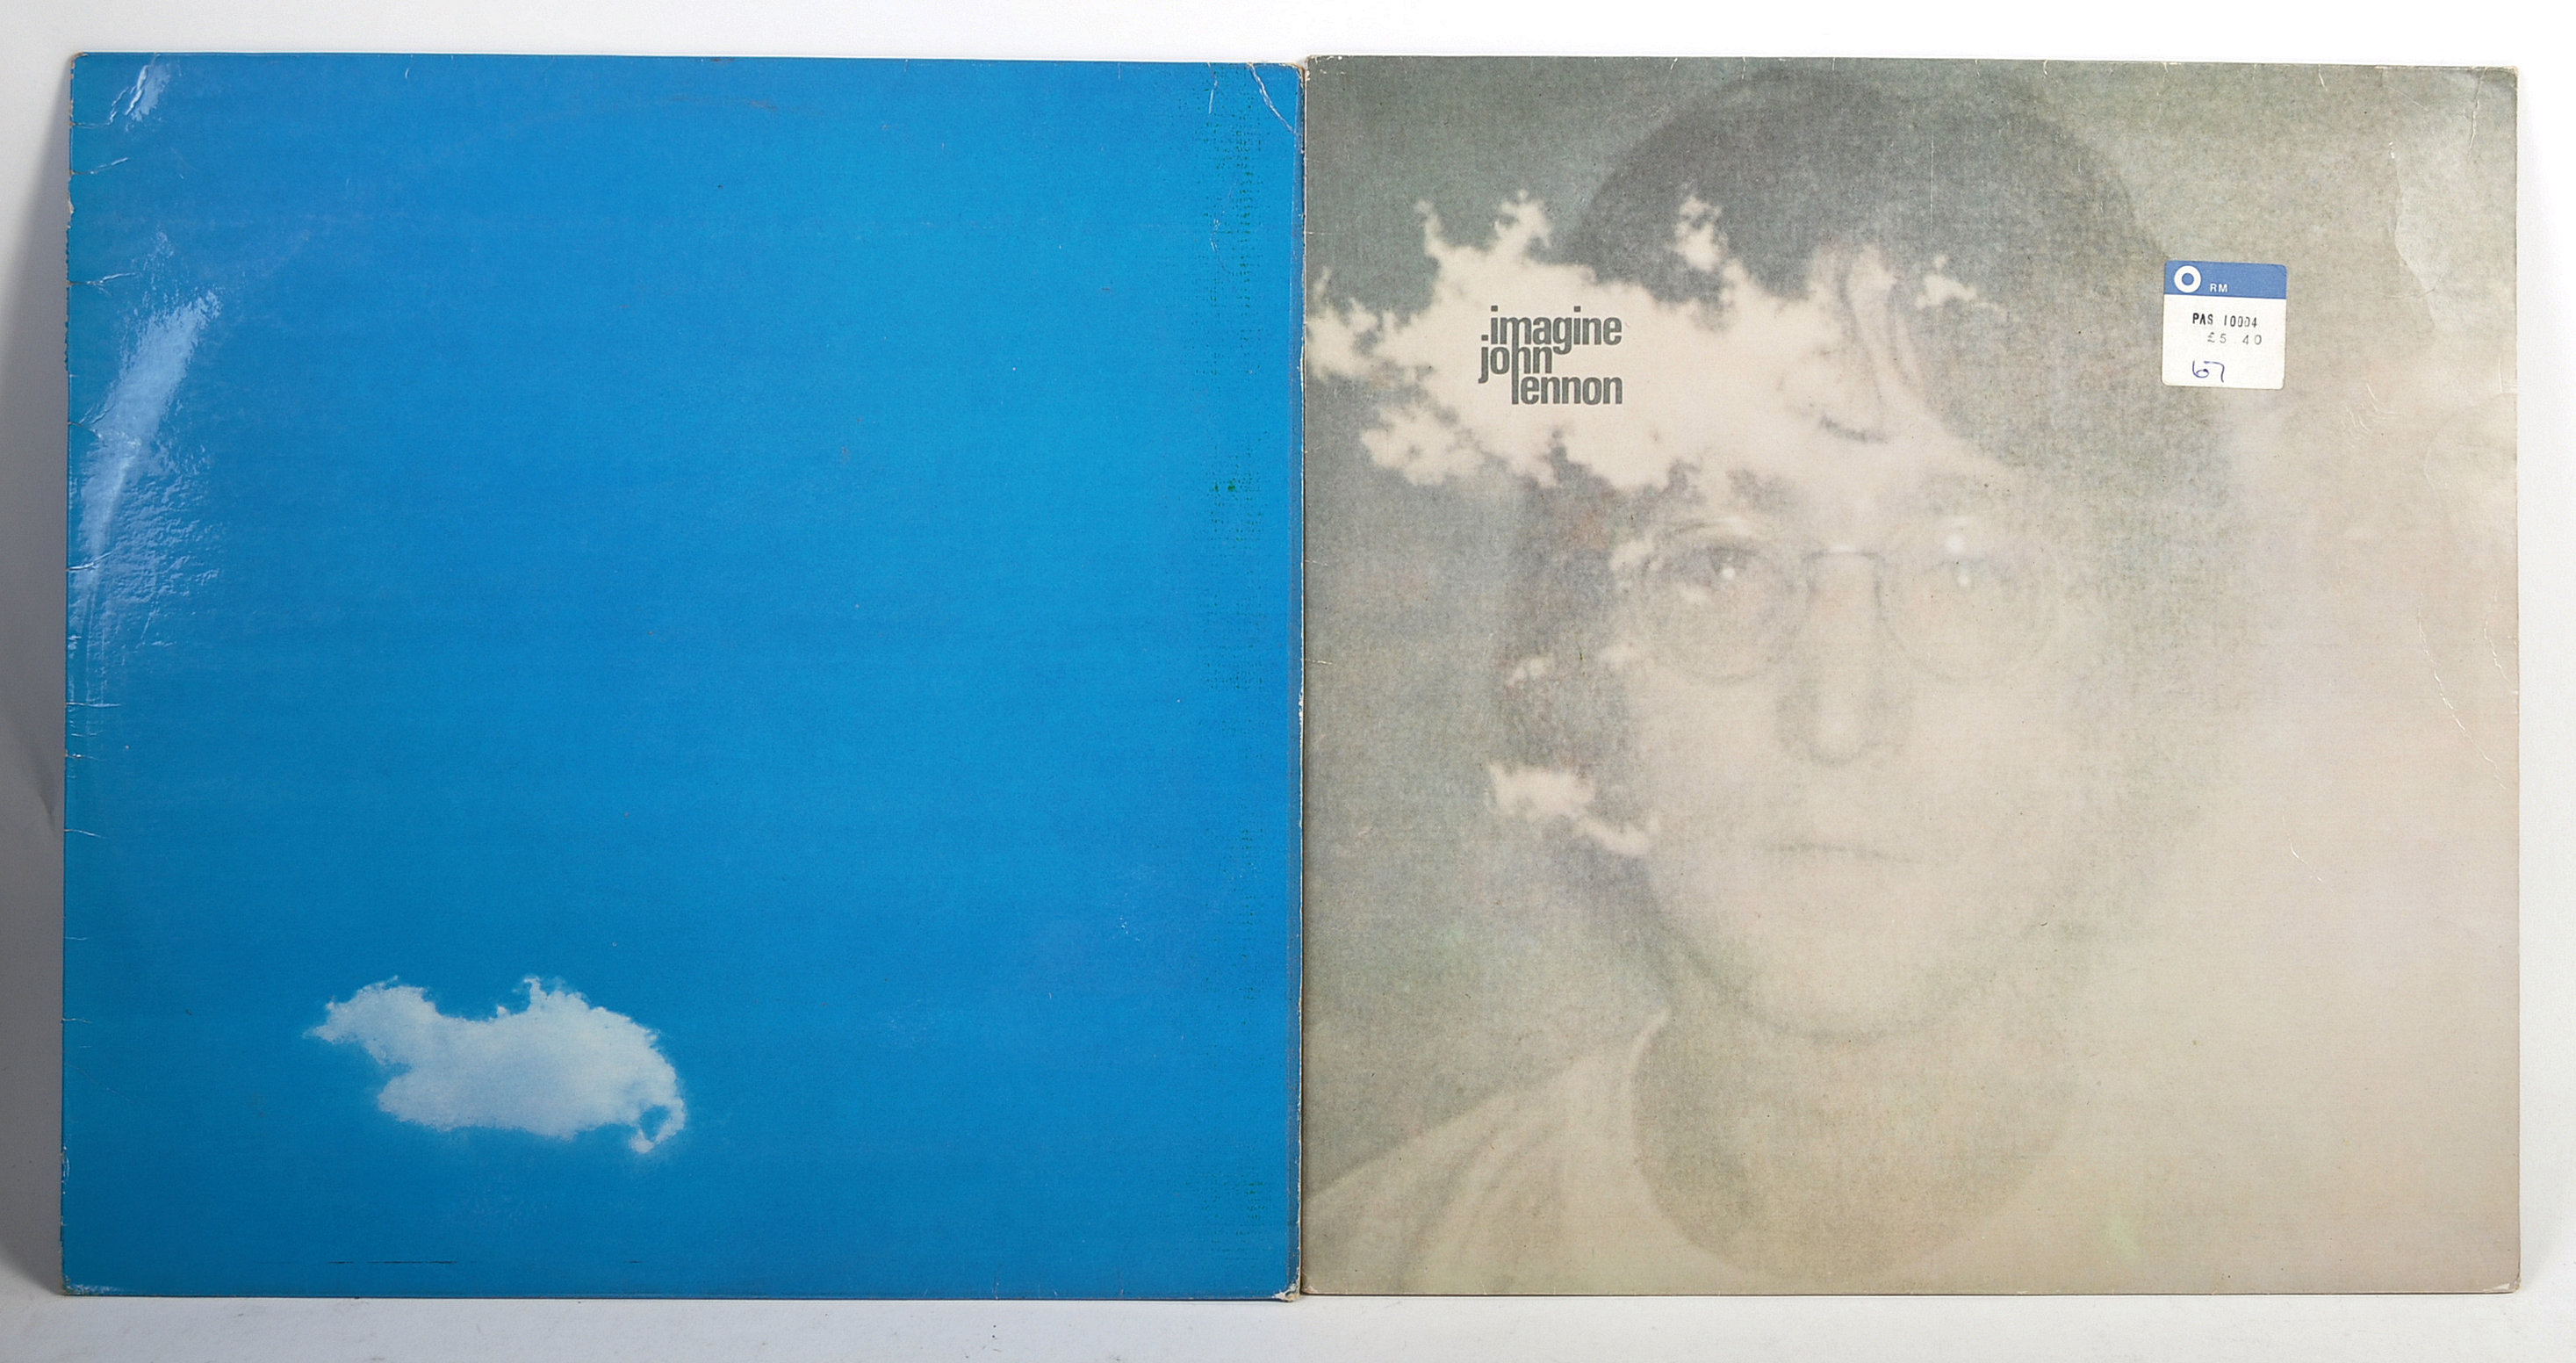 JOHN LENNON PLASTIC ONO BAND - TWO RECORD ALBUMS - LIVE PEACE IN TRONTO 1969 AND IMAGINE